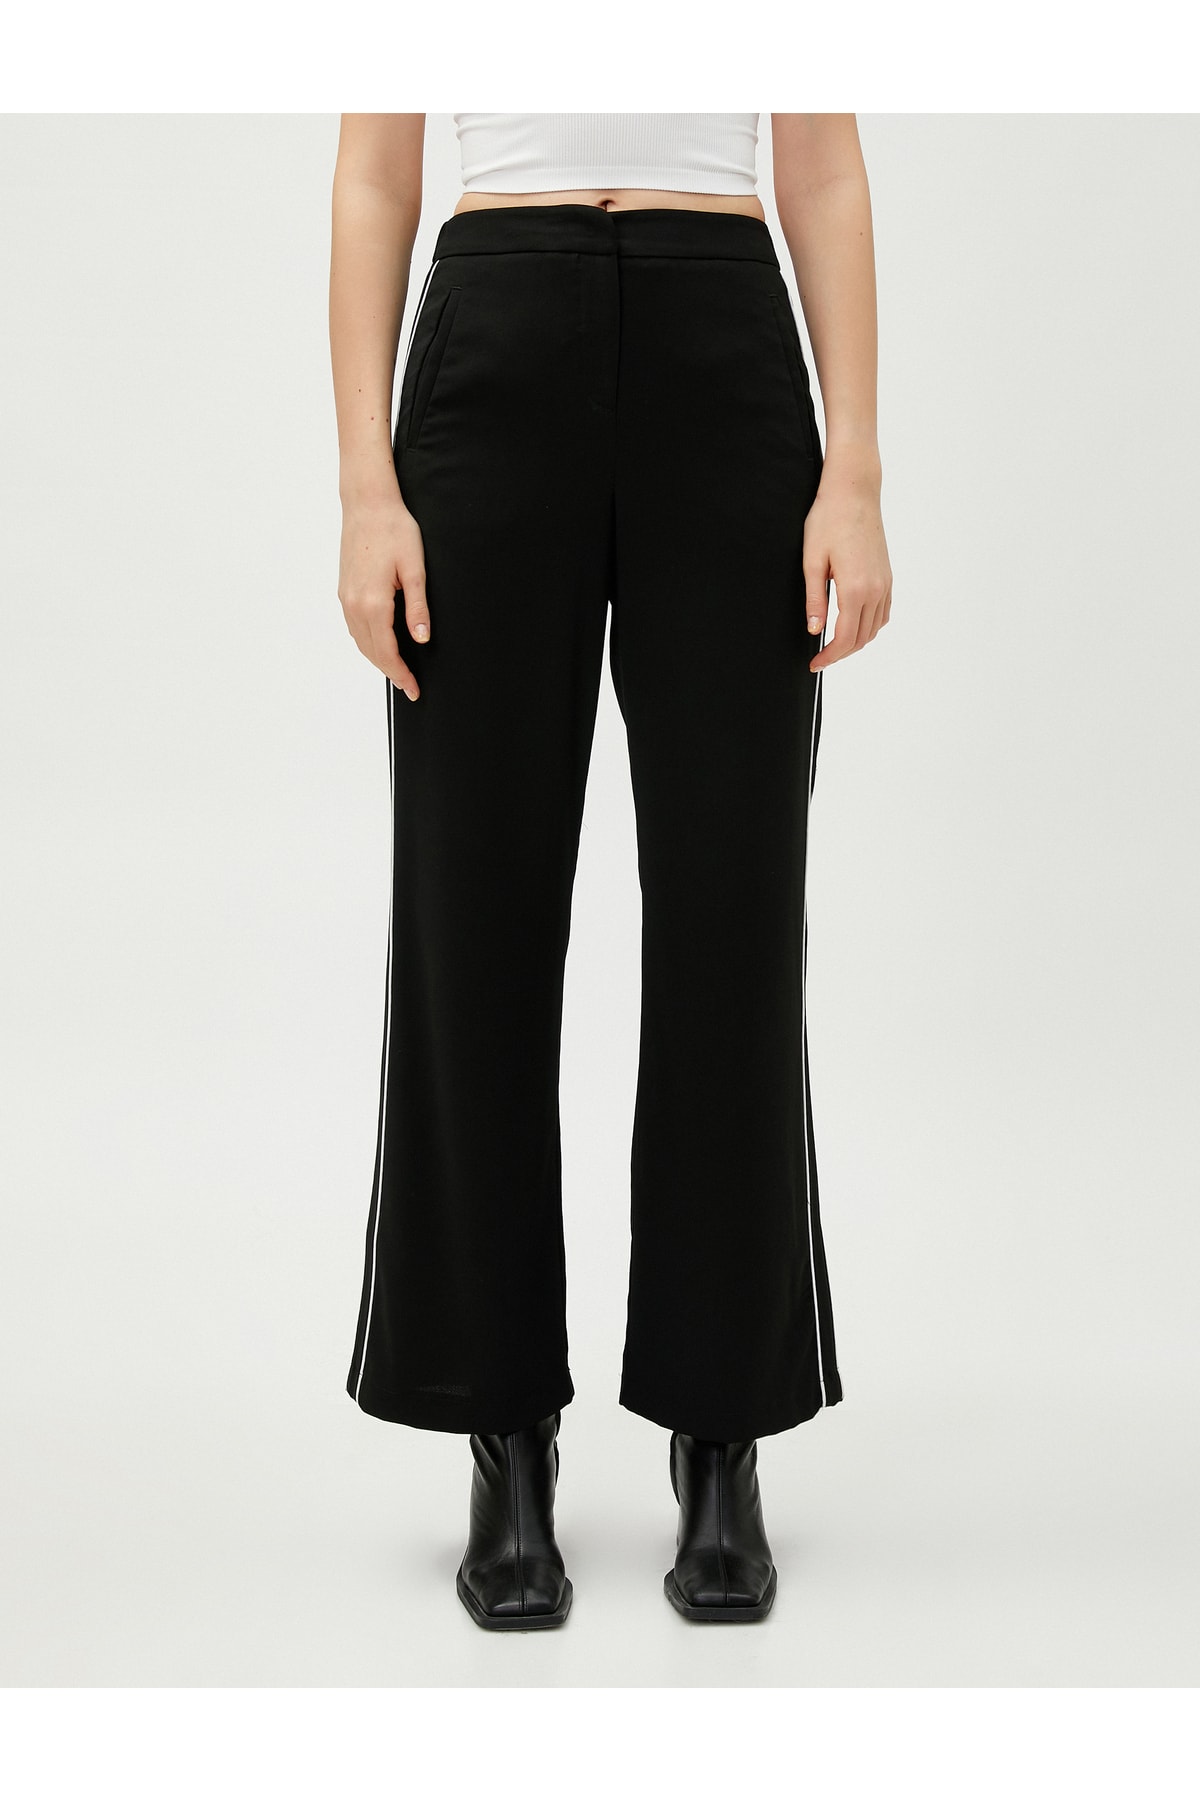 KOTON Piping Bell Bottom Trousers